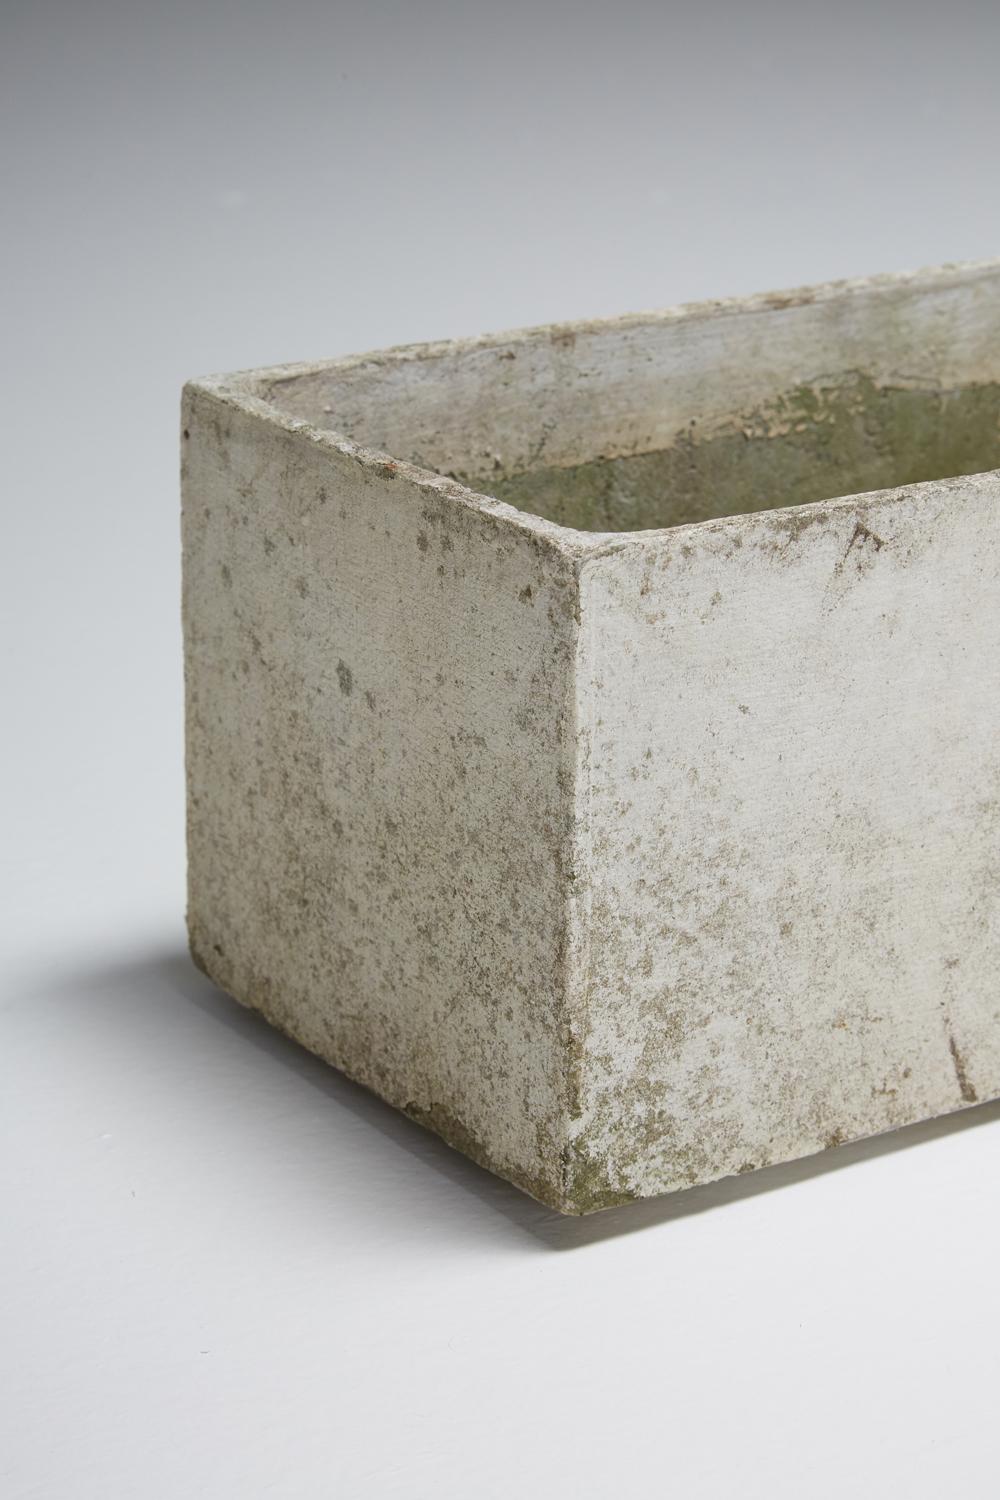 Brutalist and minimalist planters, Willy Guhl, Switzerland, 1960s

3 smaller size rectangular planters are available

Willy Guhl was a pioneering Swiss furniture designer and one of the first industrial designers in Switzerland. Known for his Loop